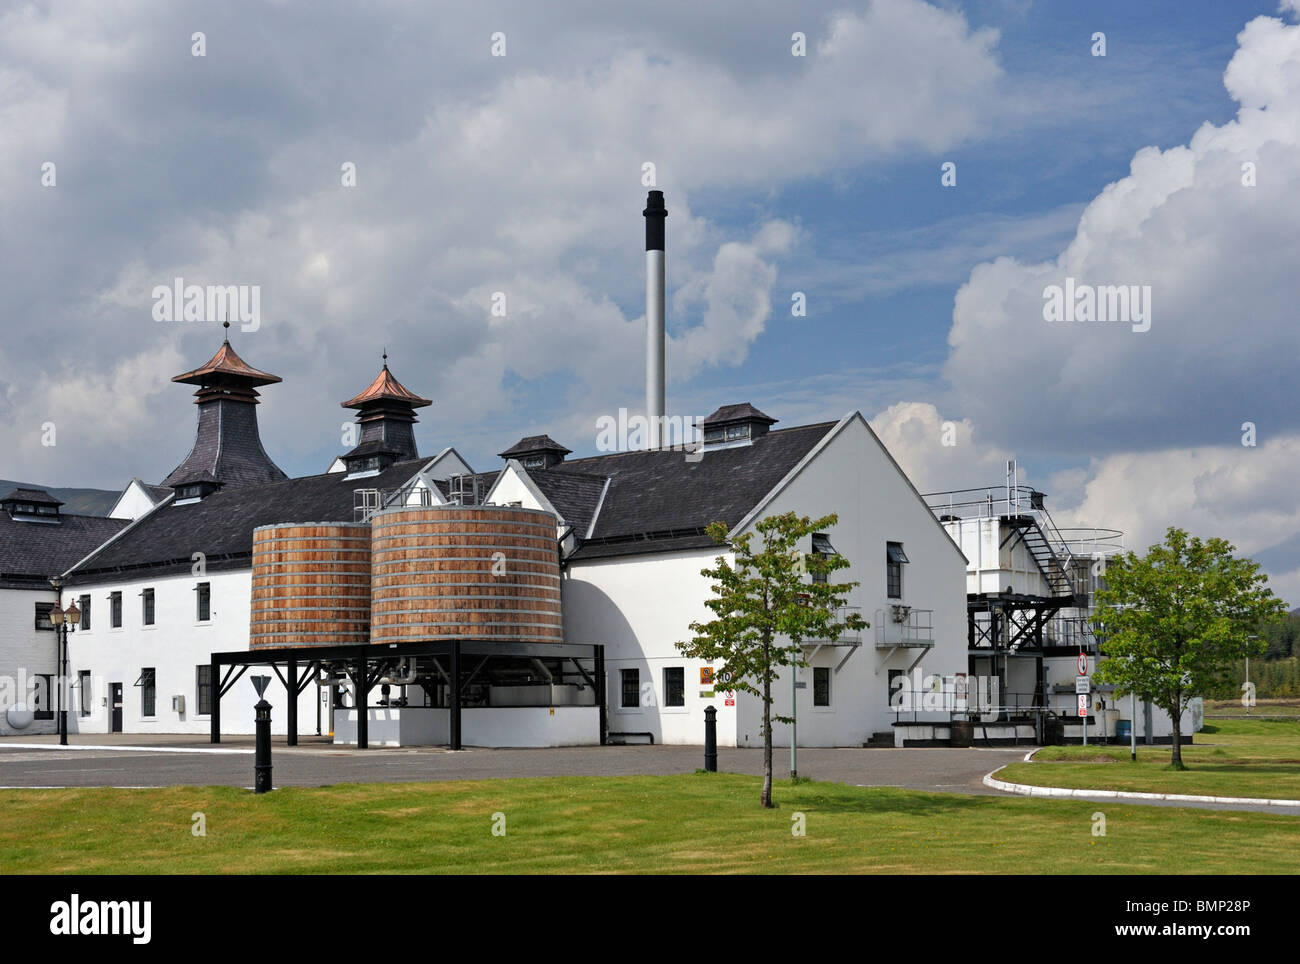 Dalwhinnie Whisky Distillery, Dalwhinnie, Inverness-shire, Scotland, United Kingdom, Europe. Stock Photo